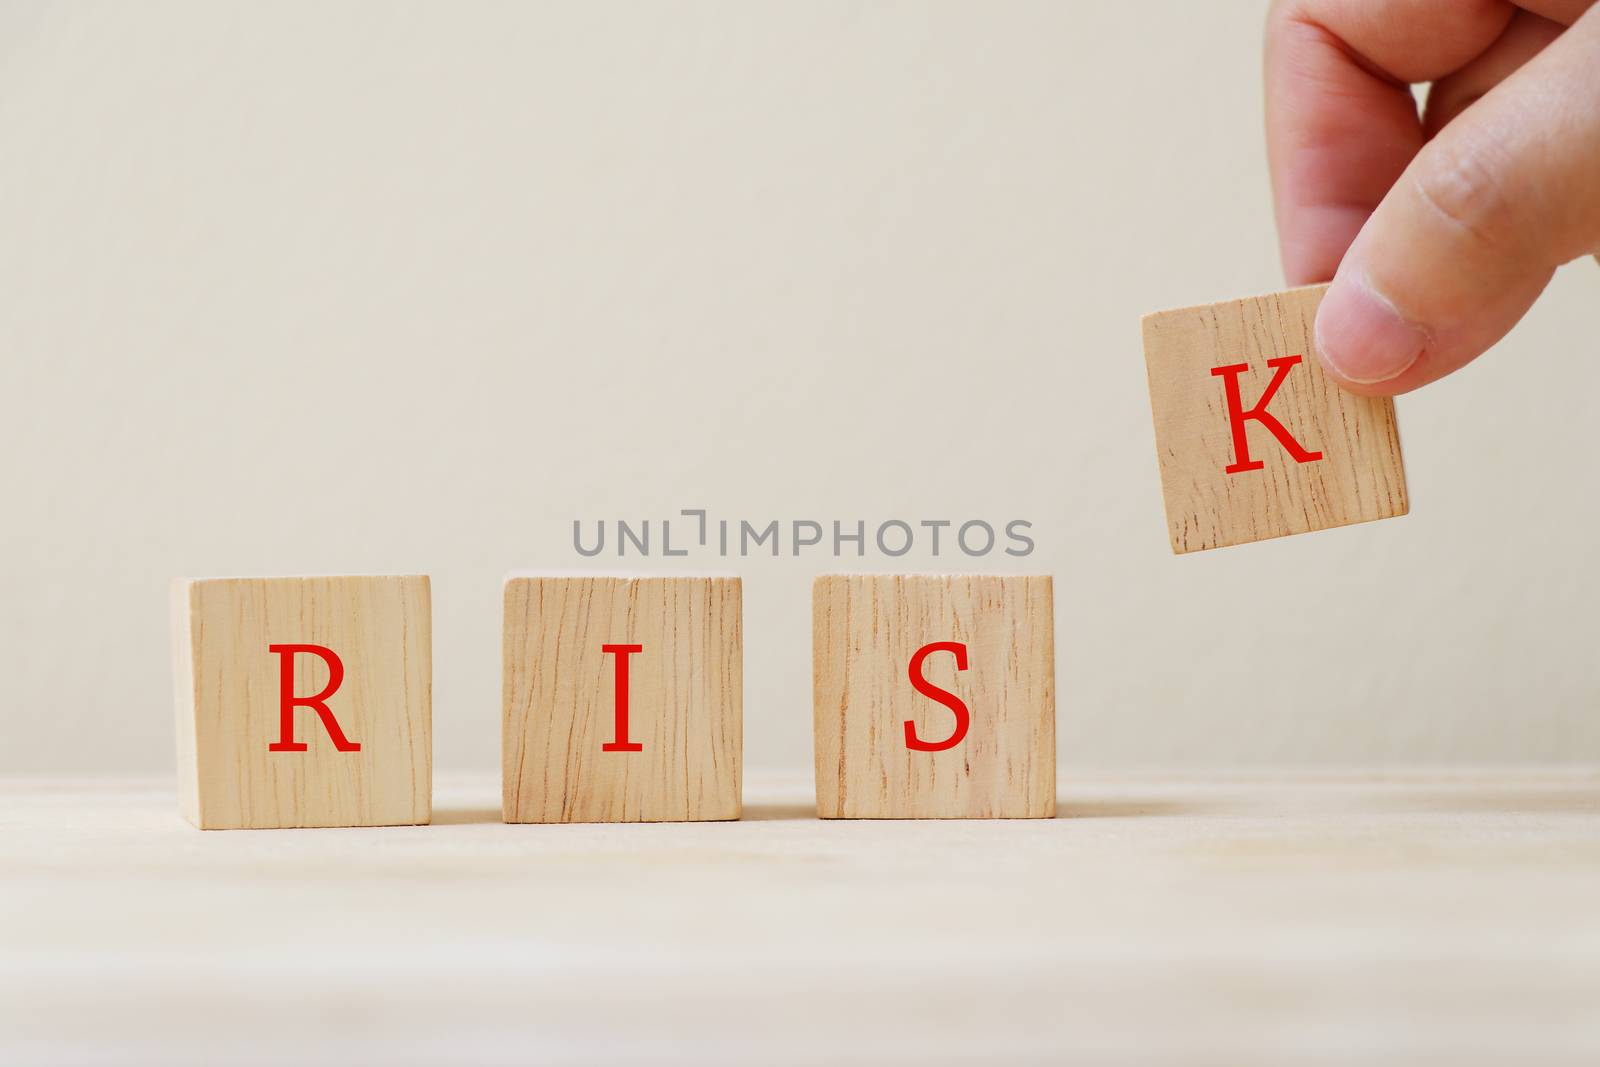 The word "risk" on the wooden cube with hand holding the letter K.